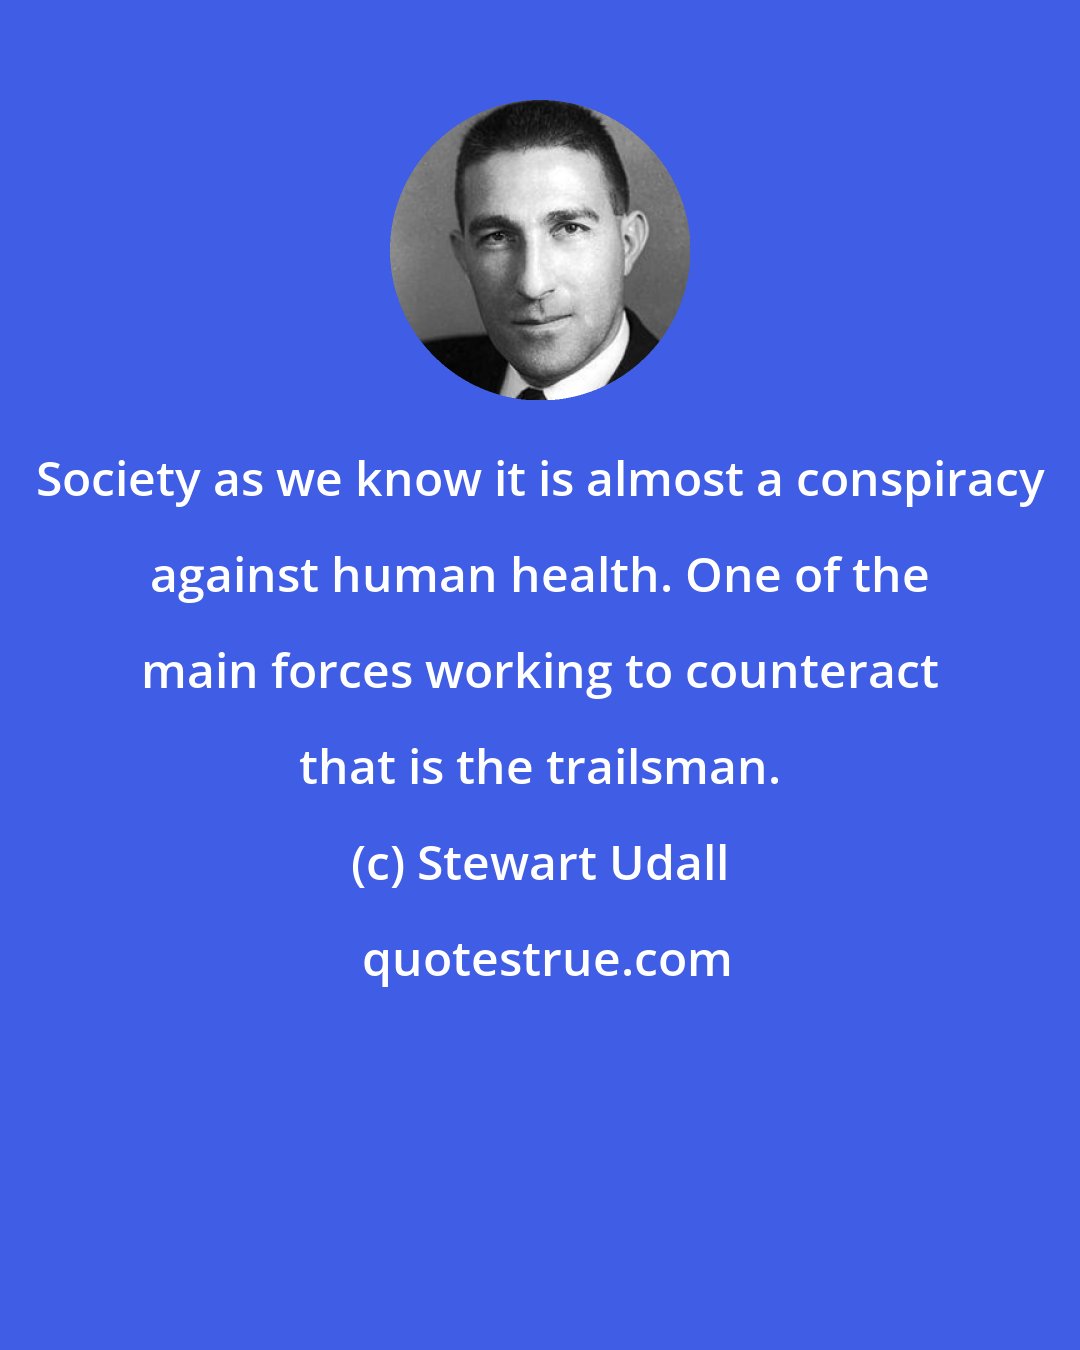 Stewart Udall: Society as we know it is almost a conspiracy against human health. One of the main forces working to counteract that is the trailsman.